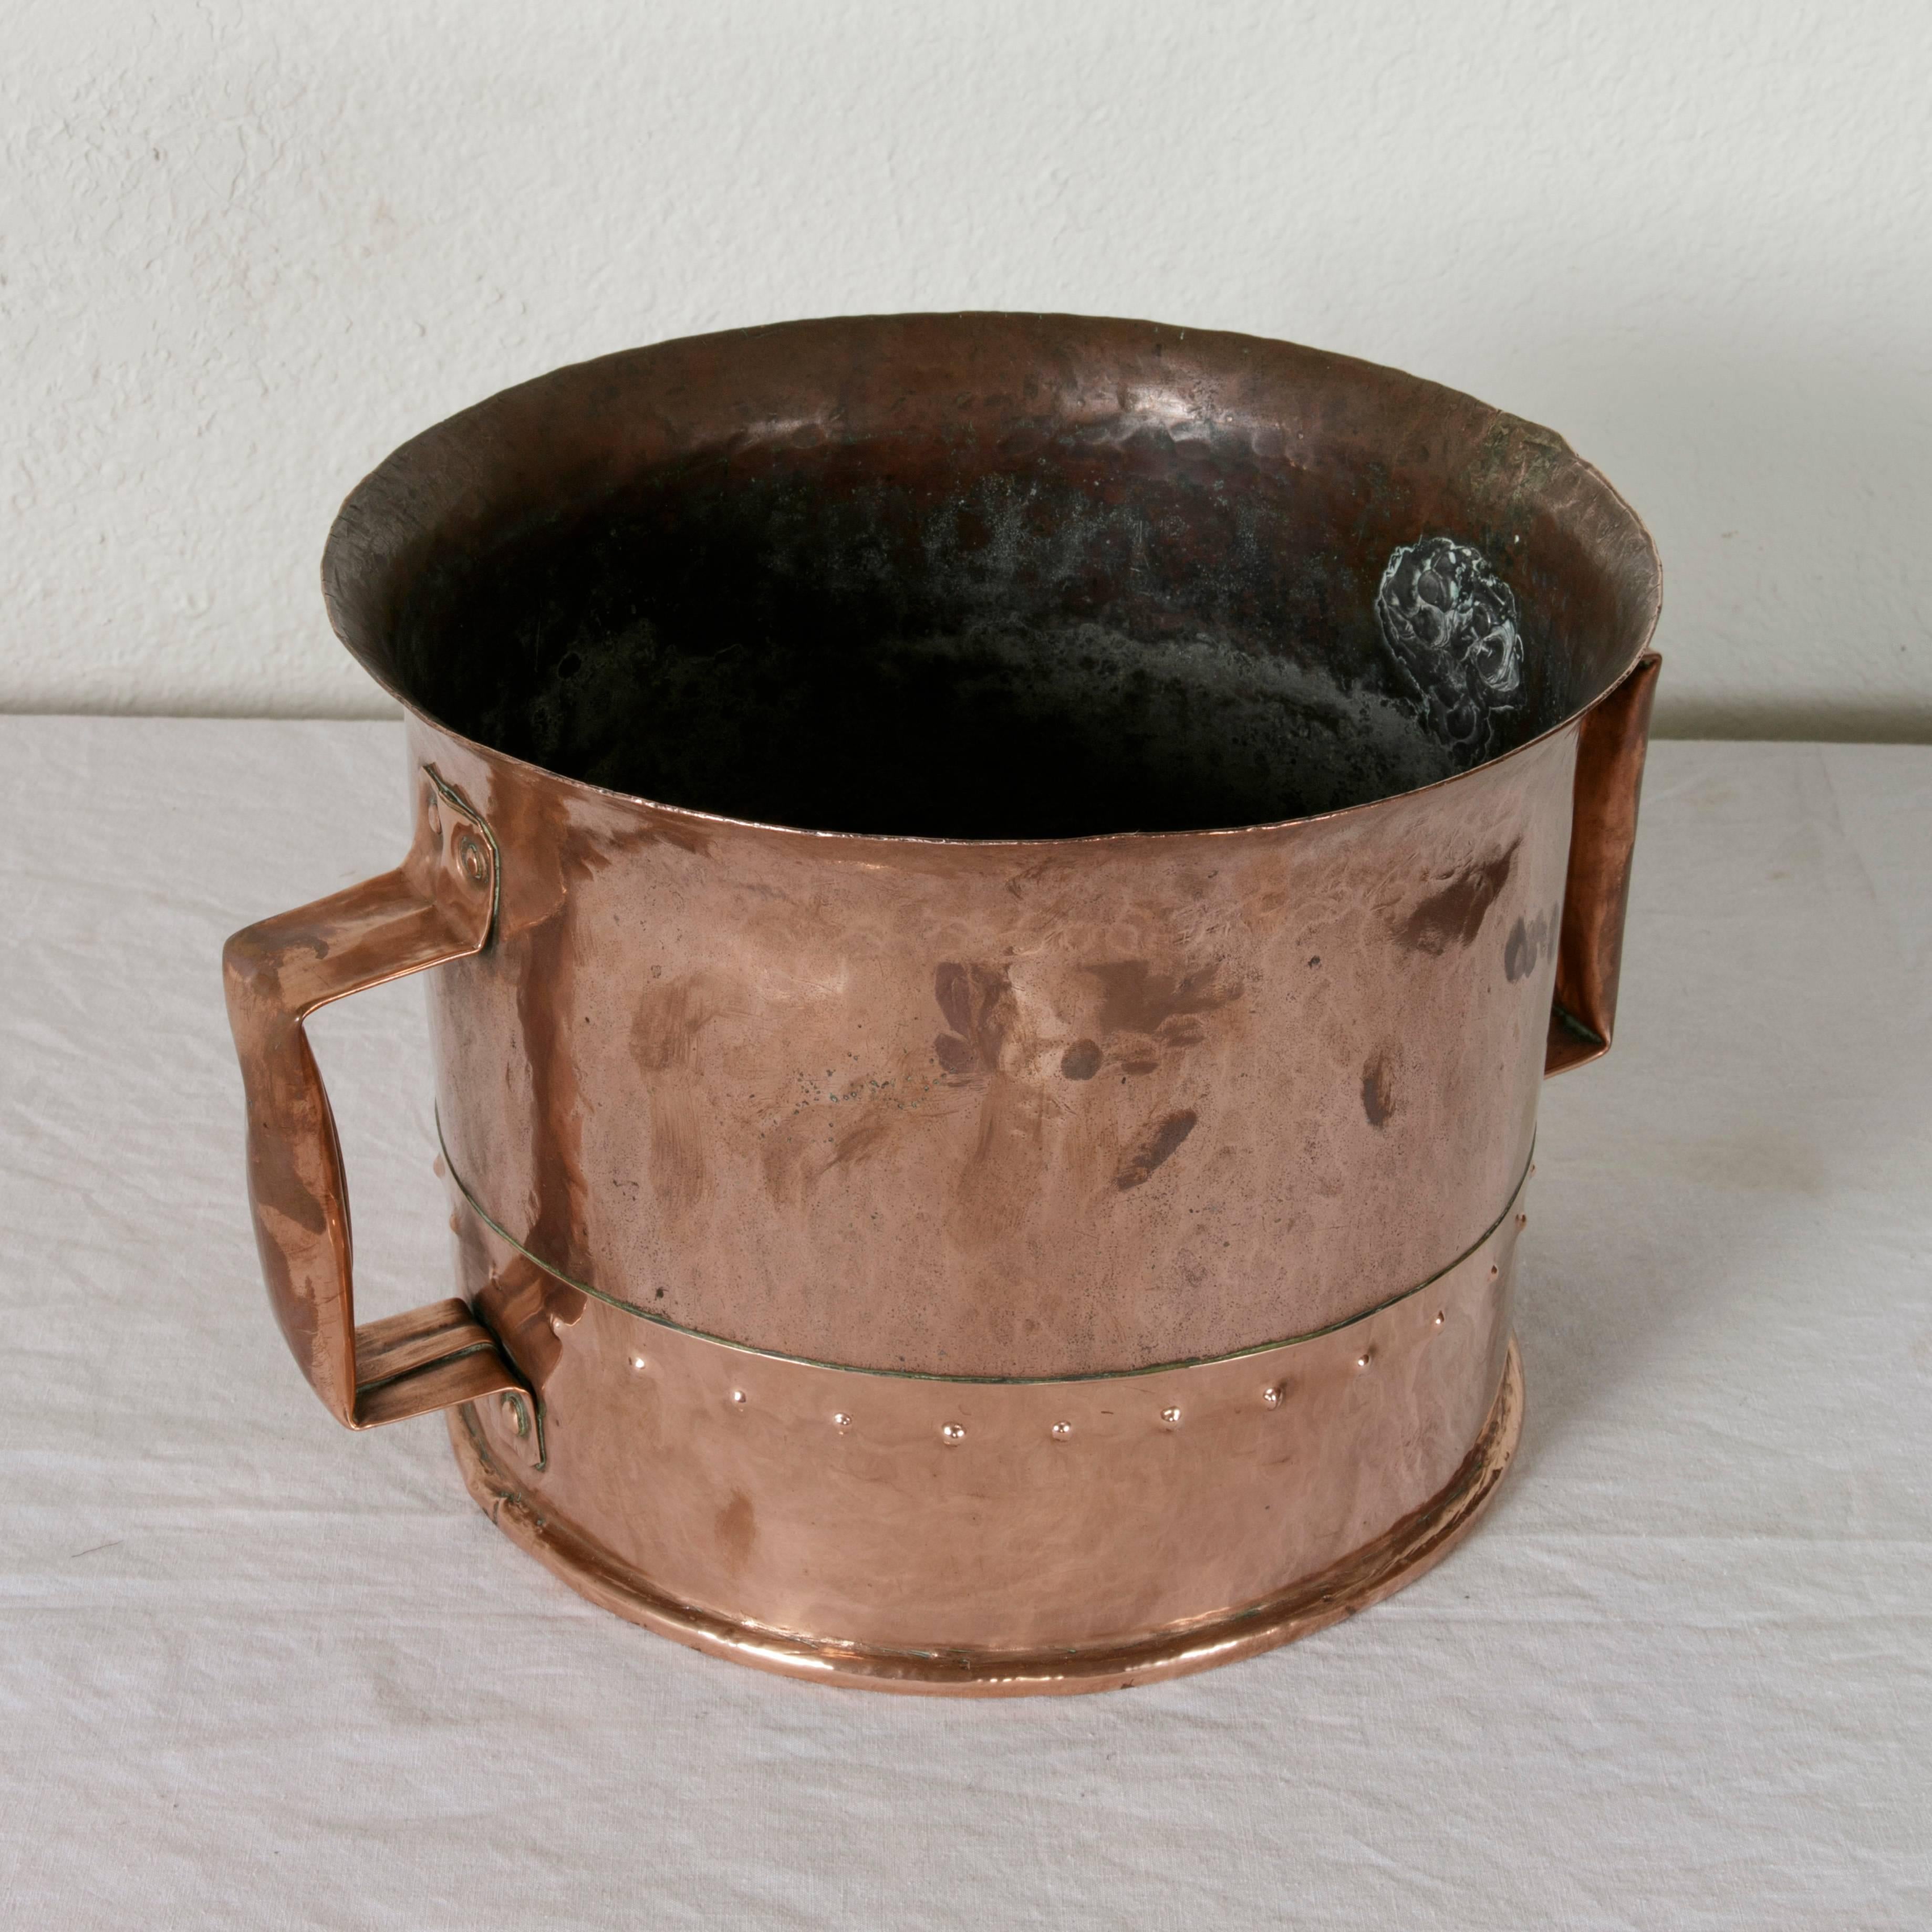 This late 19th century riveted copper water bucket features a concave bottom that was designed to help one carry the bucket on one's head to transport water. A copper riveted handle on each side allowed for the bucket to be held upright. With an